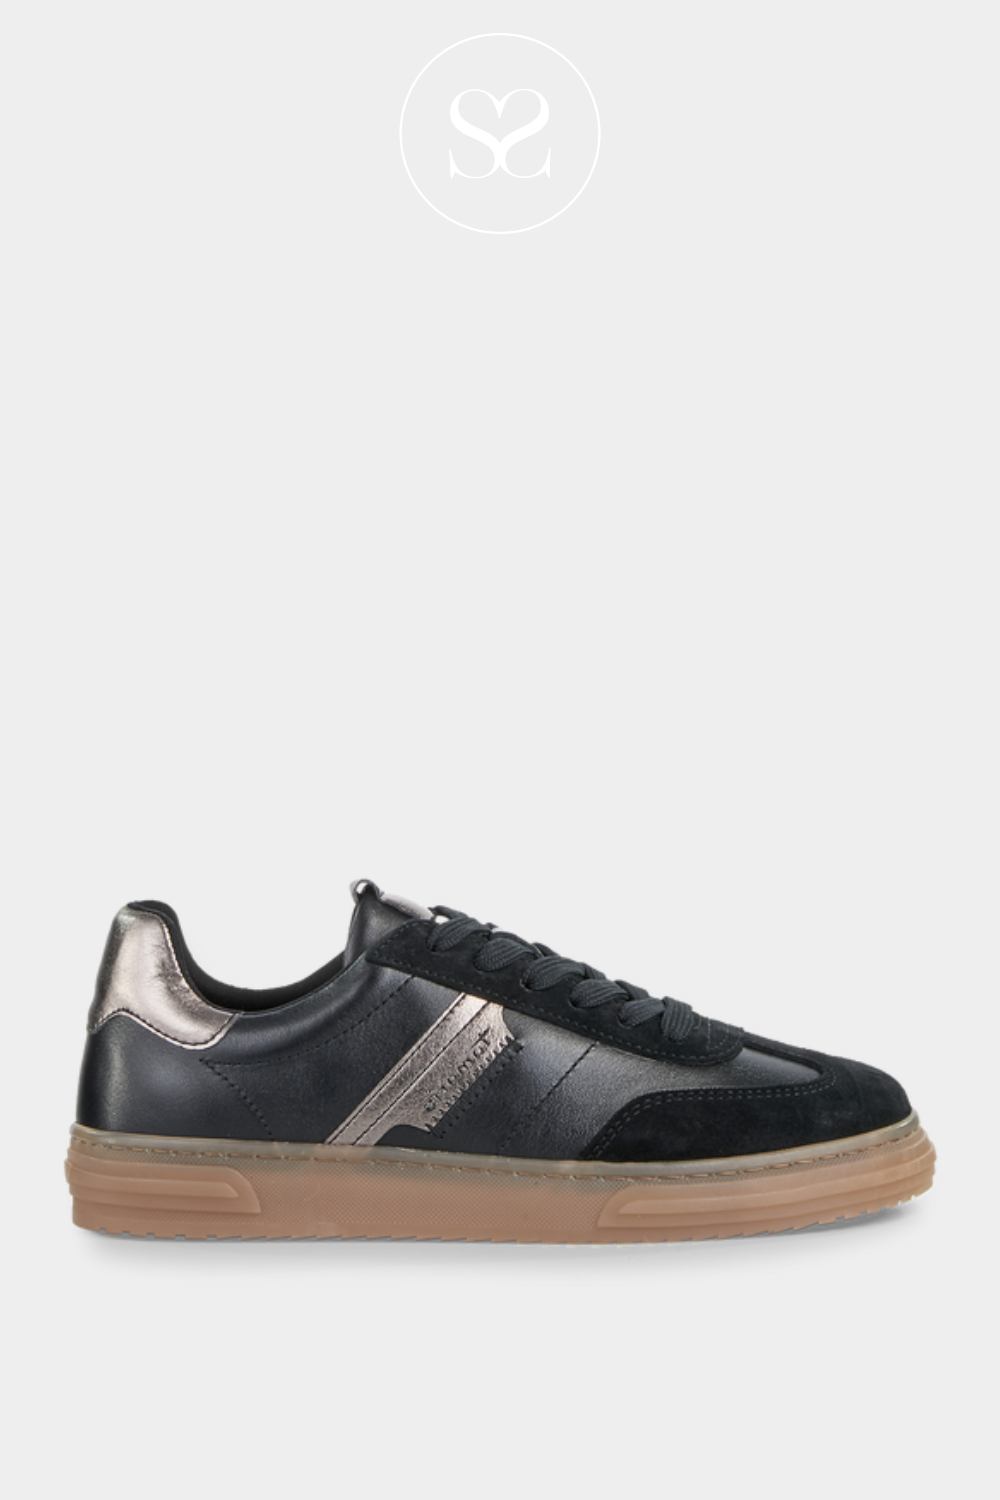 TAMARIS 1-23788-42 BLACK LEATHER SPORTY TRAINERS